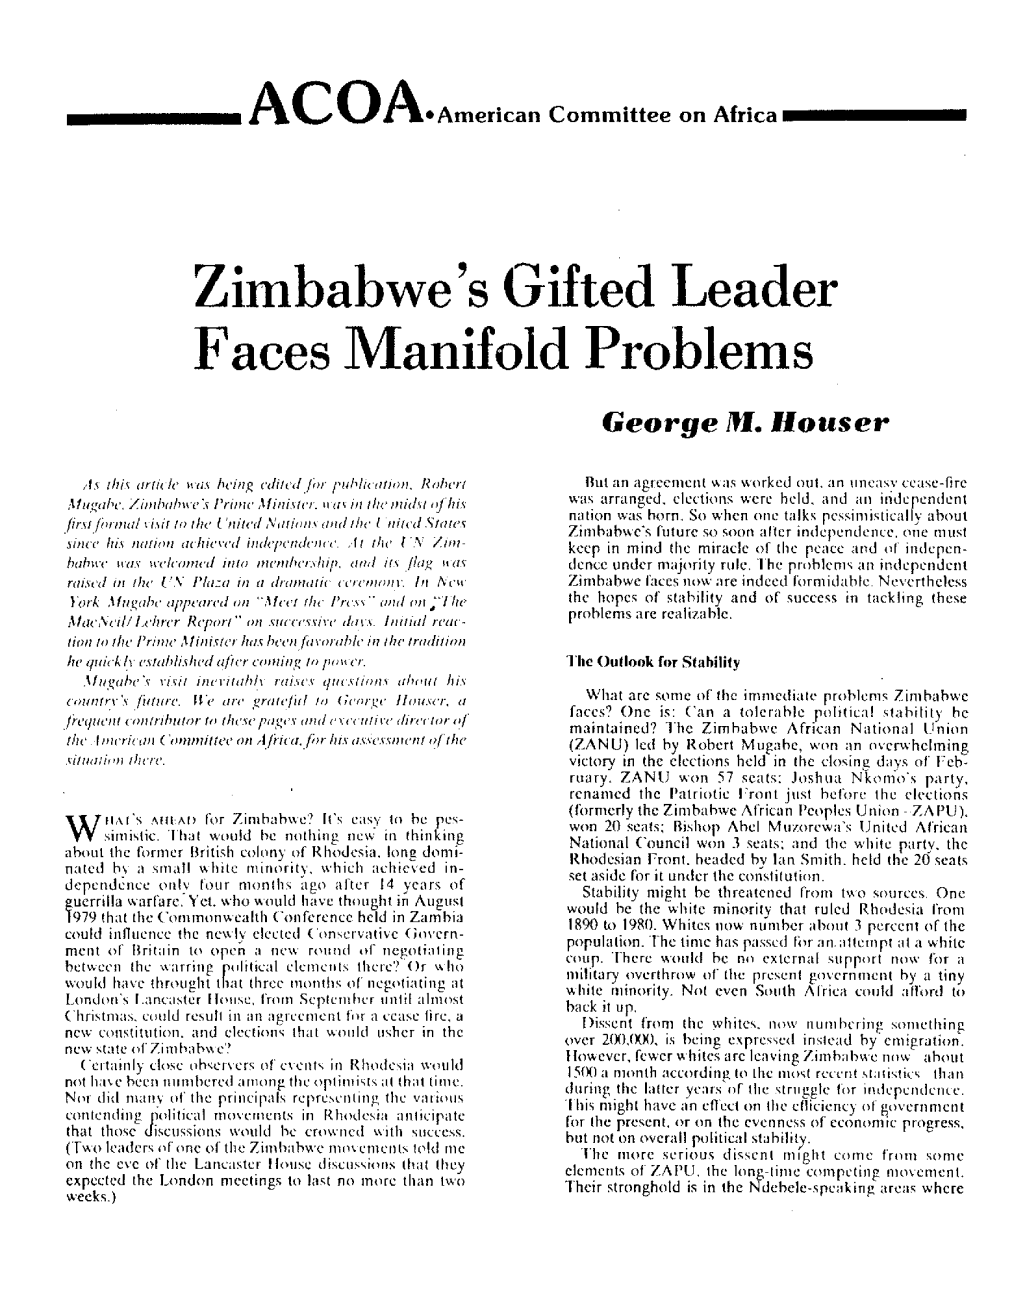 Zimbabwe's Gifted Leader Faces Manifold Problems